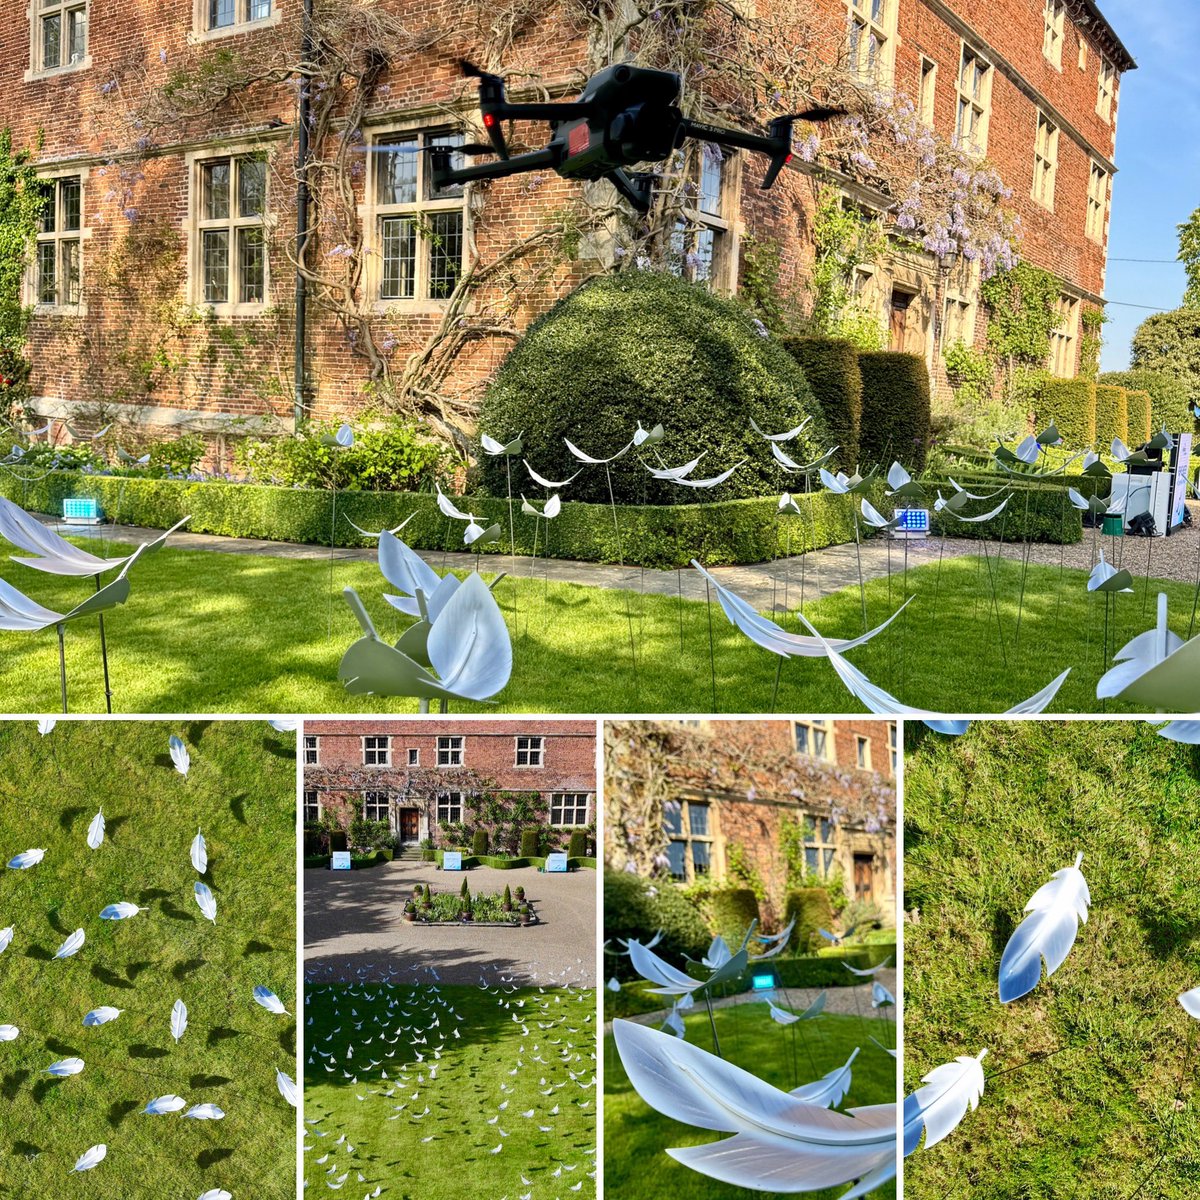 Really pleased to help out @StBarnabasLinc to promote the Feathers from Above installation at Aubourn Hall and Gardens. It looks superb.🎥🎬

#thedroneman  #kurniaaerialphotography #DroneProduction #AerialProduction #DroneVideography #AerialFilming #DroneFilming